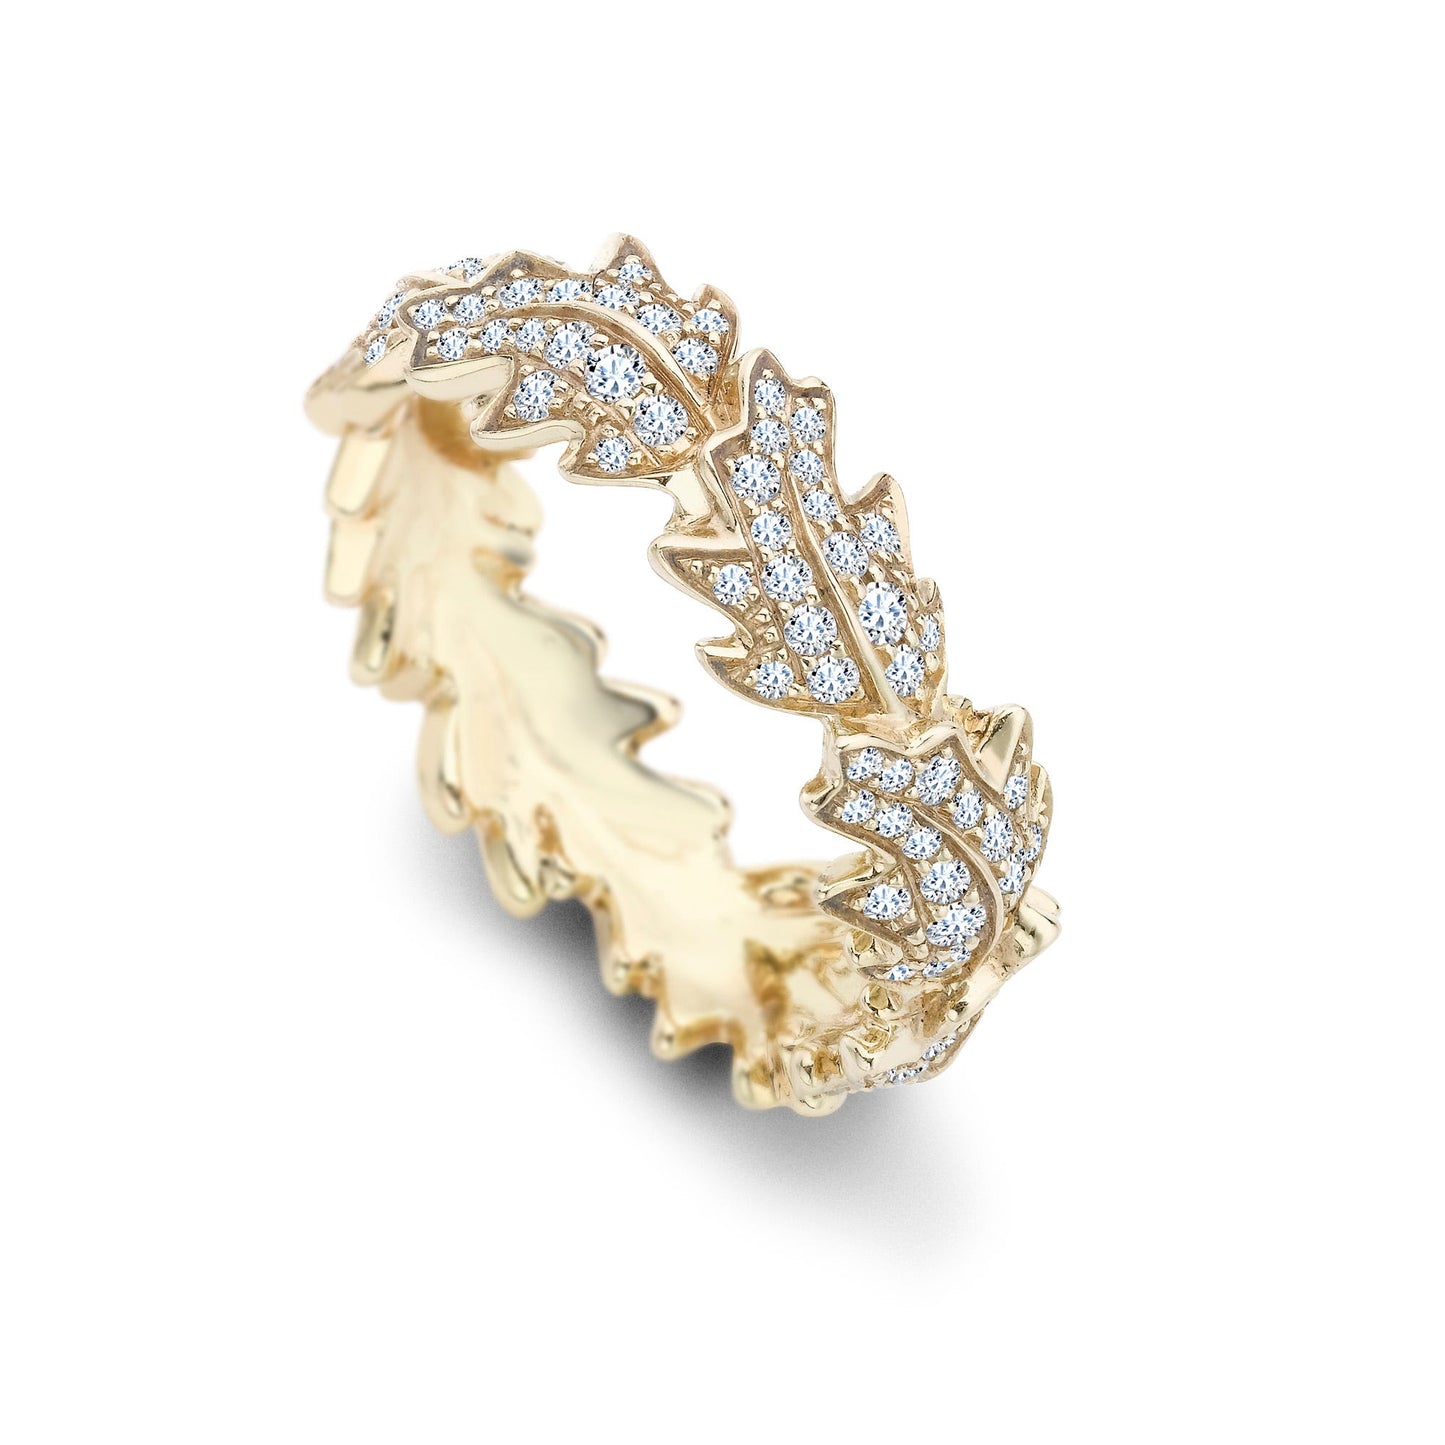 Woodland Oak Leaf Ring in 18ct Yellow Gold with Diamonds